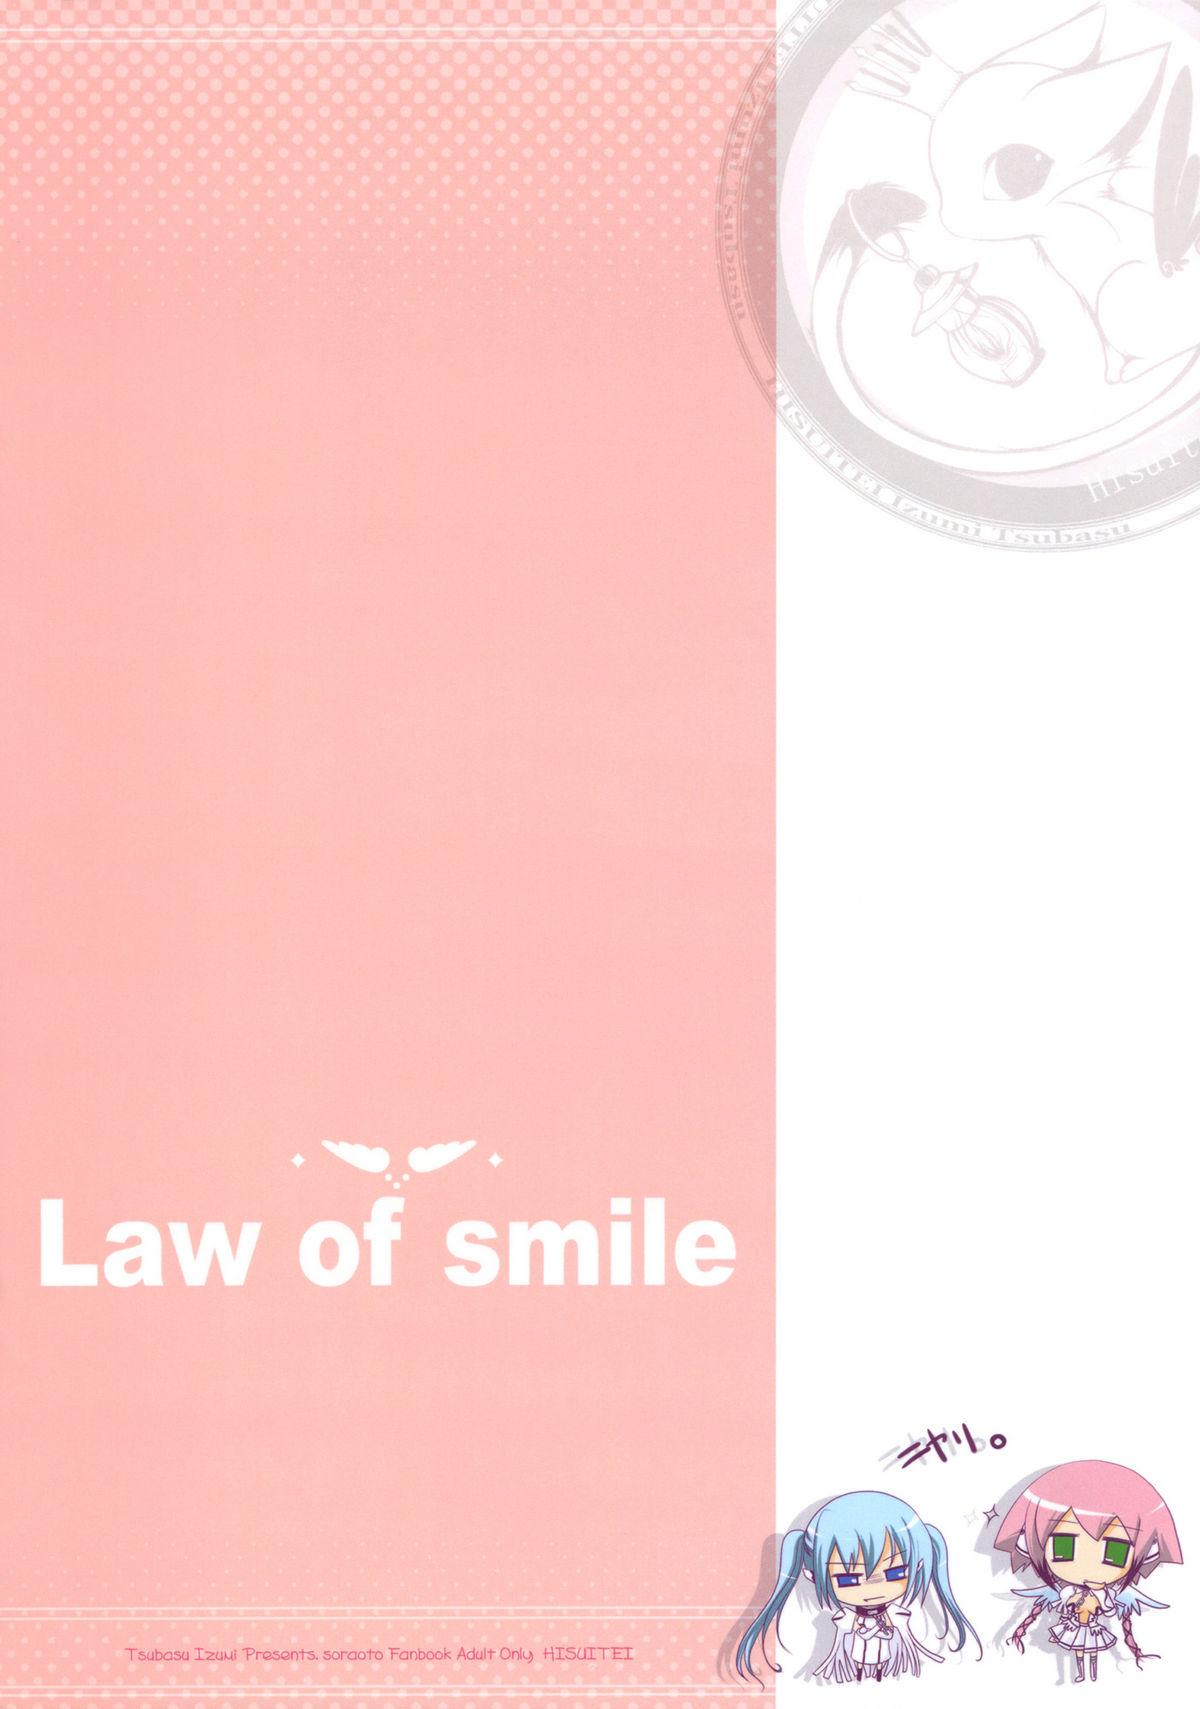 Law of smile 21